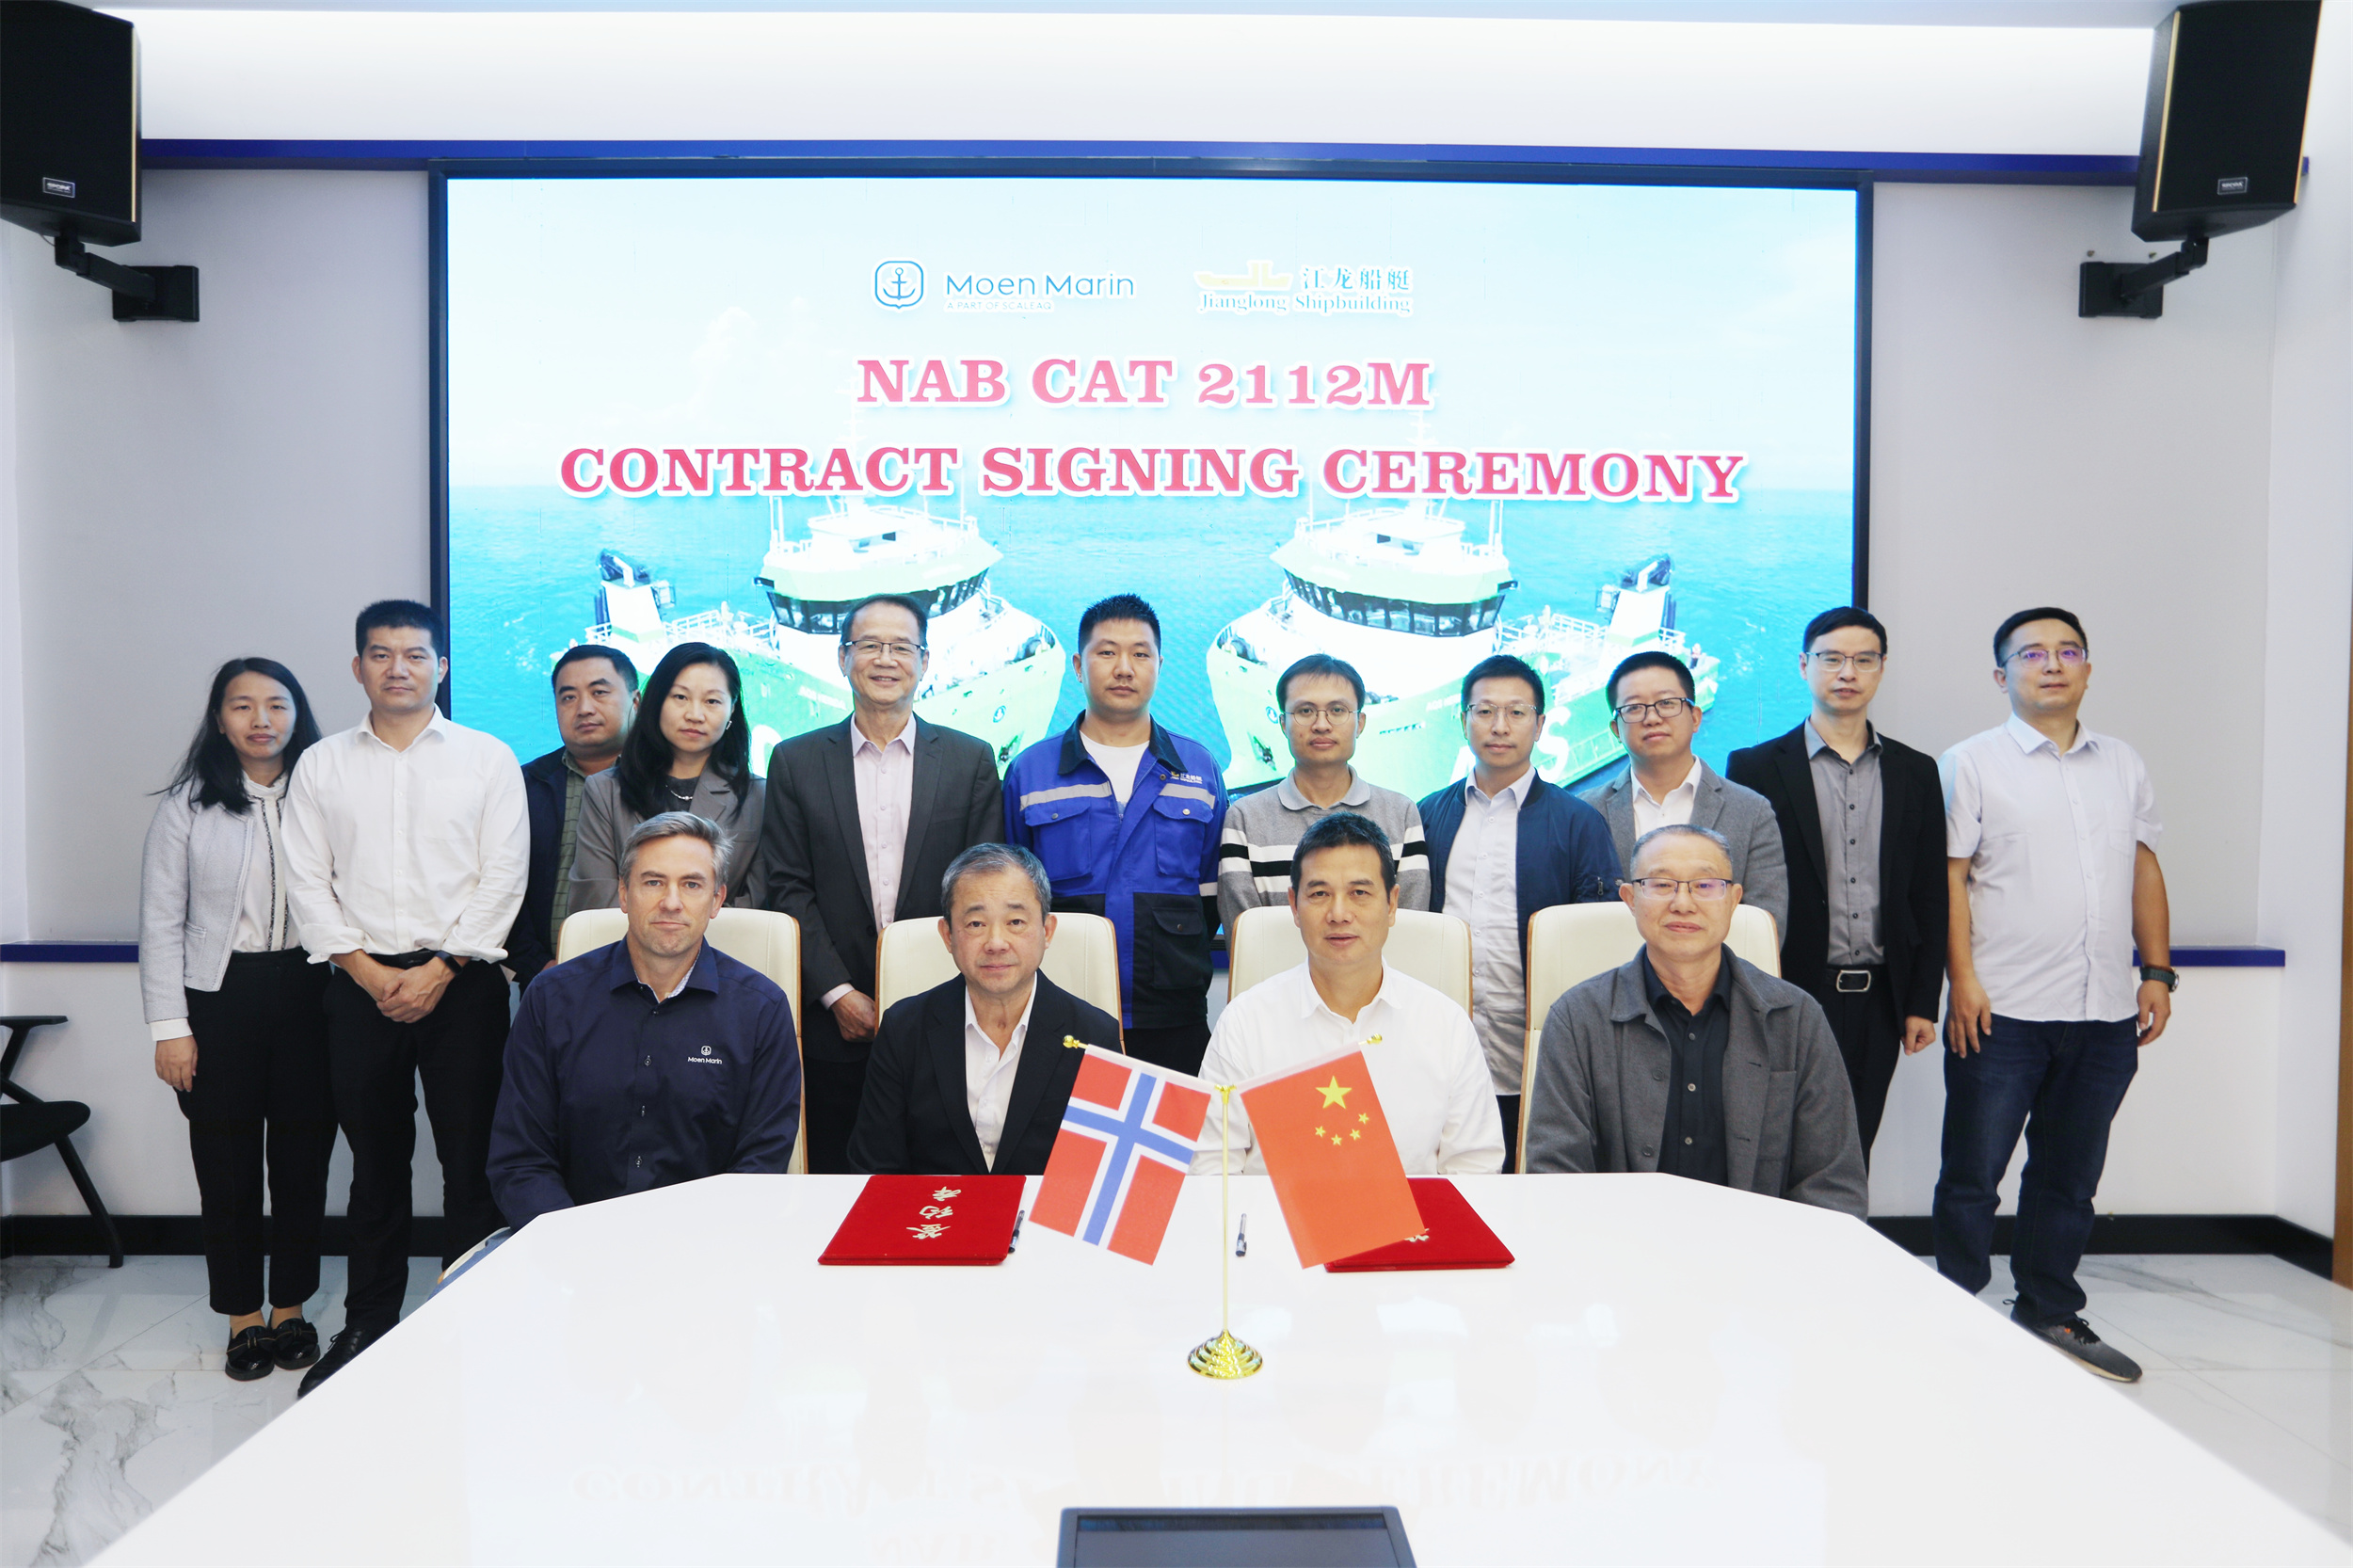 Jianglong Shipbuilding signed a contract with Moen Marin AS of Norway for two 21-meter aquaculture workboats